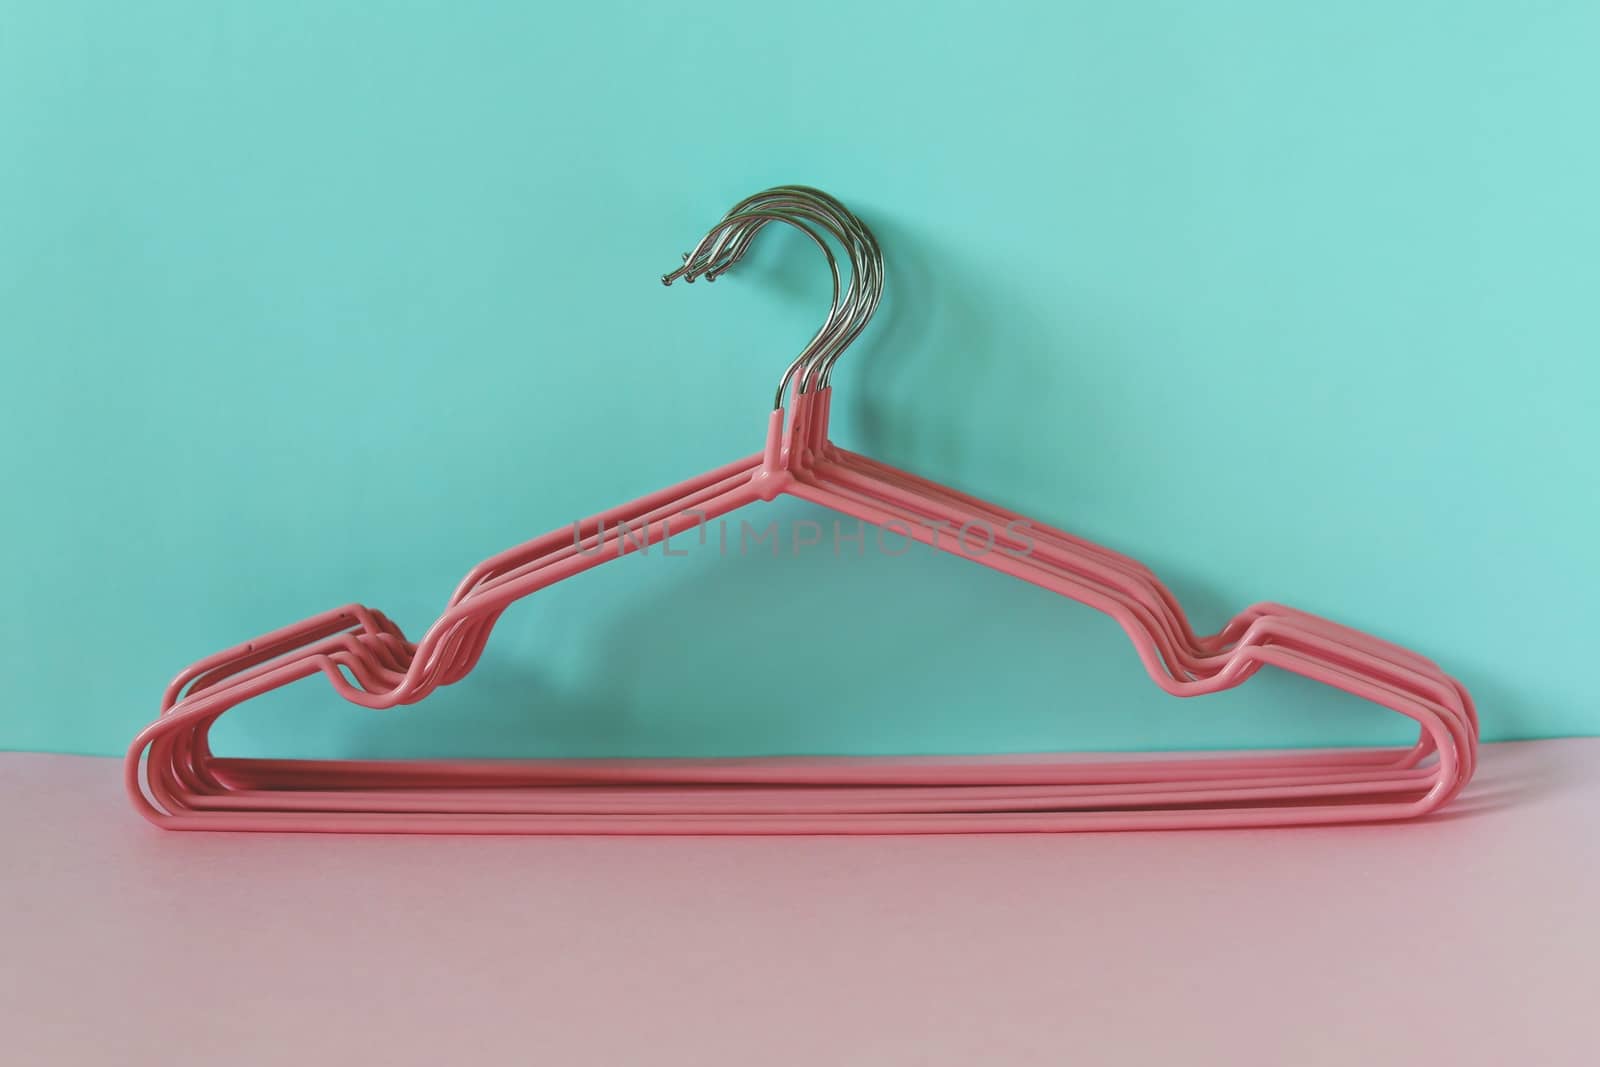 Clothes hangers on blue-pink background for household items.